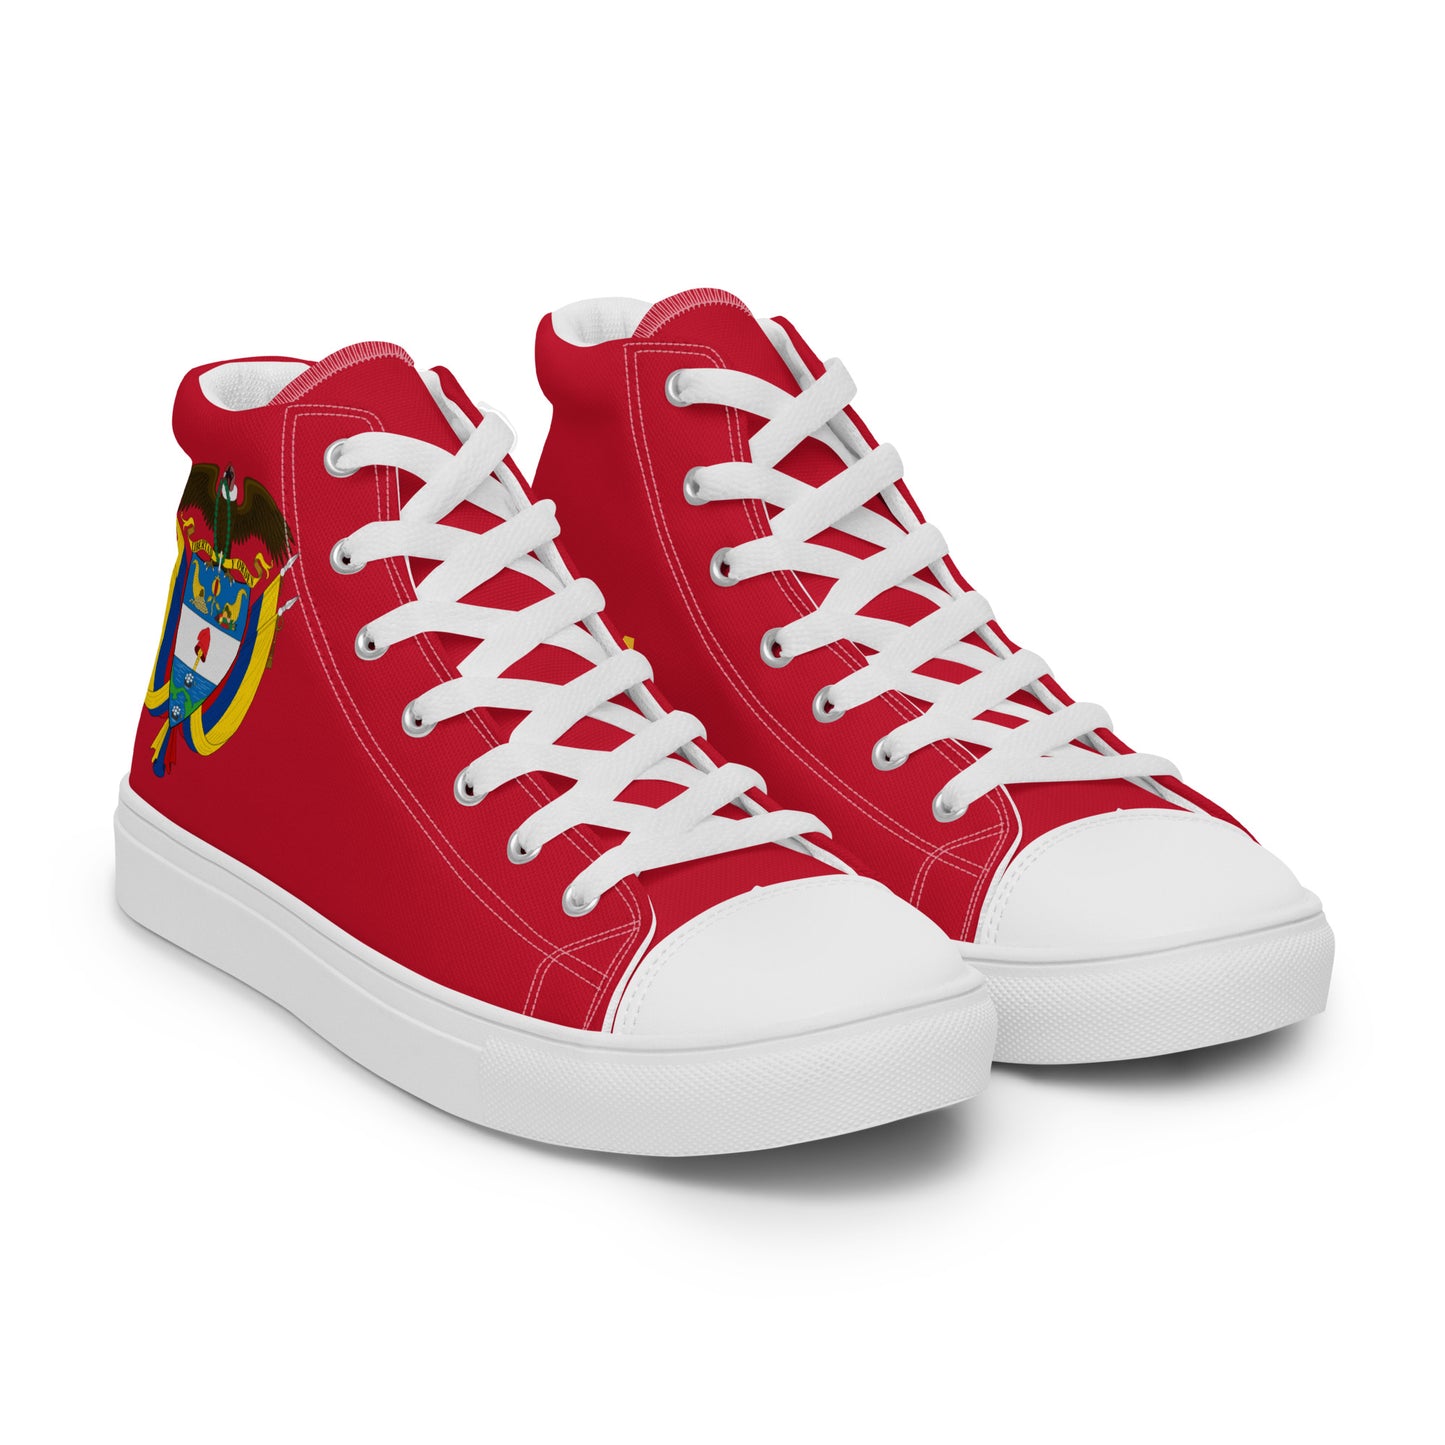 Colombia - Women - Red - High top shoes